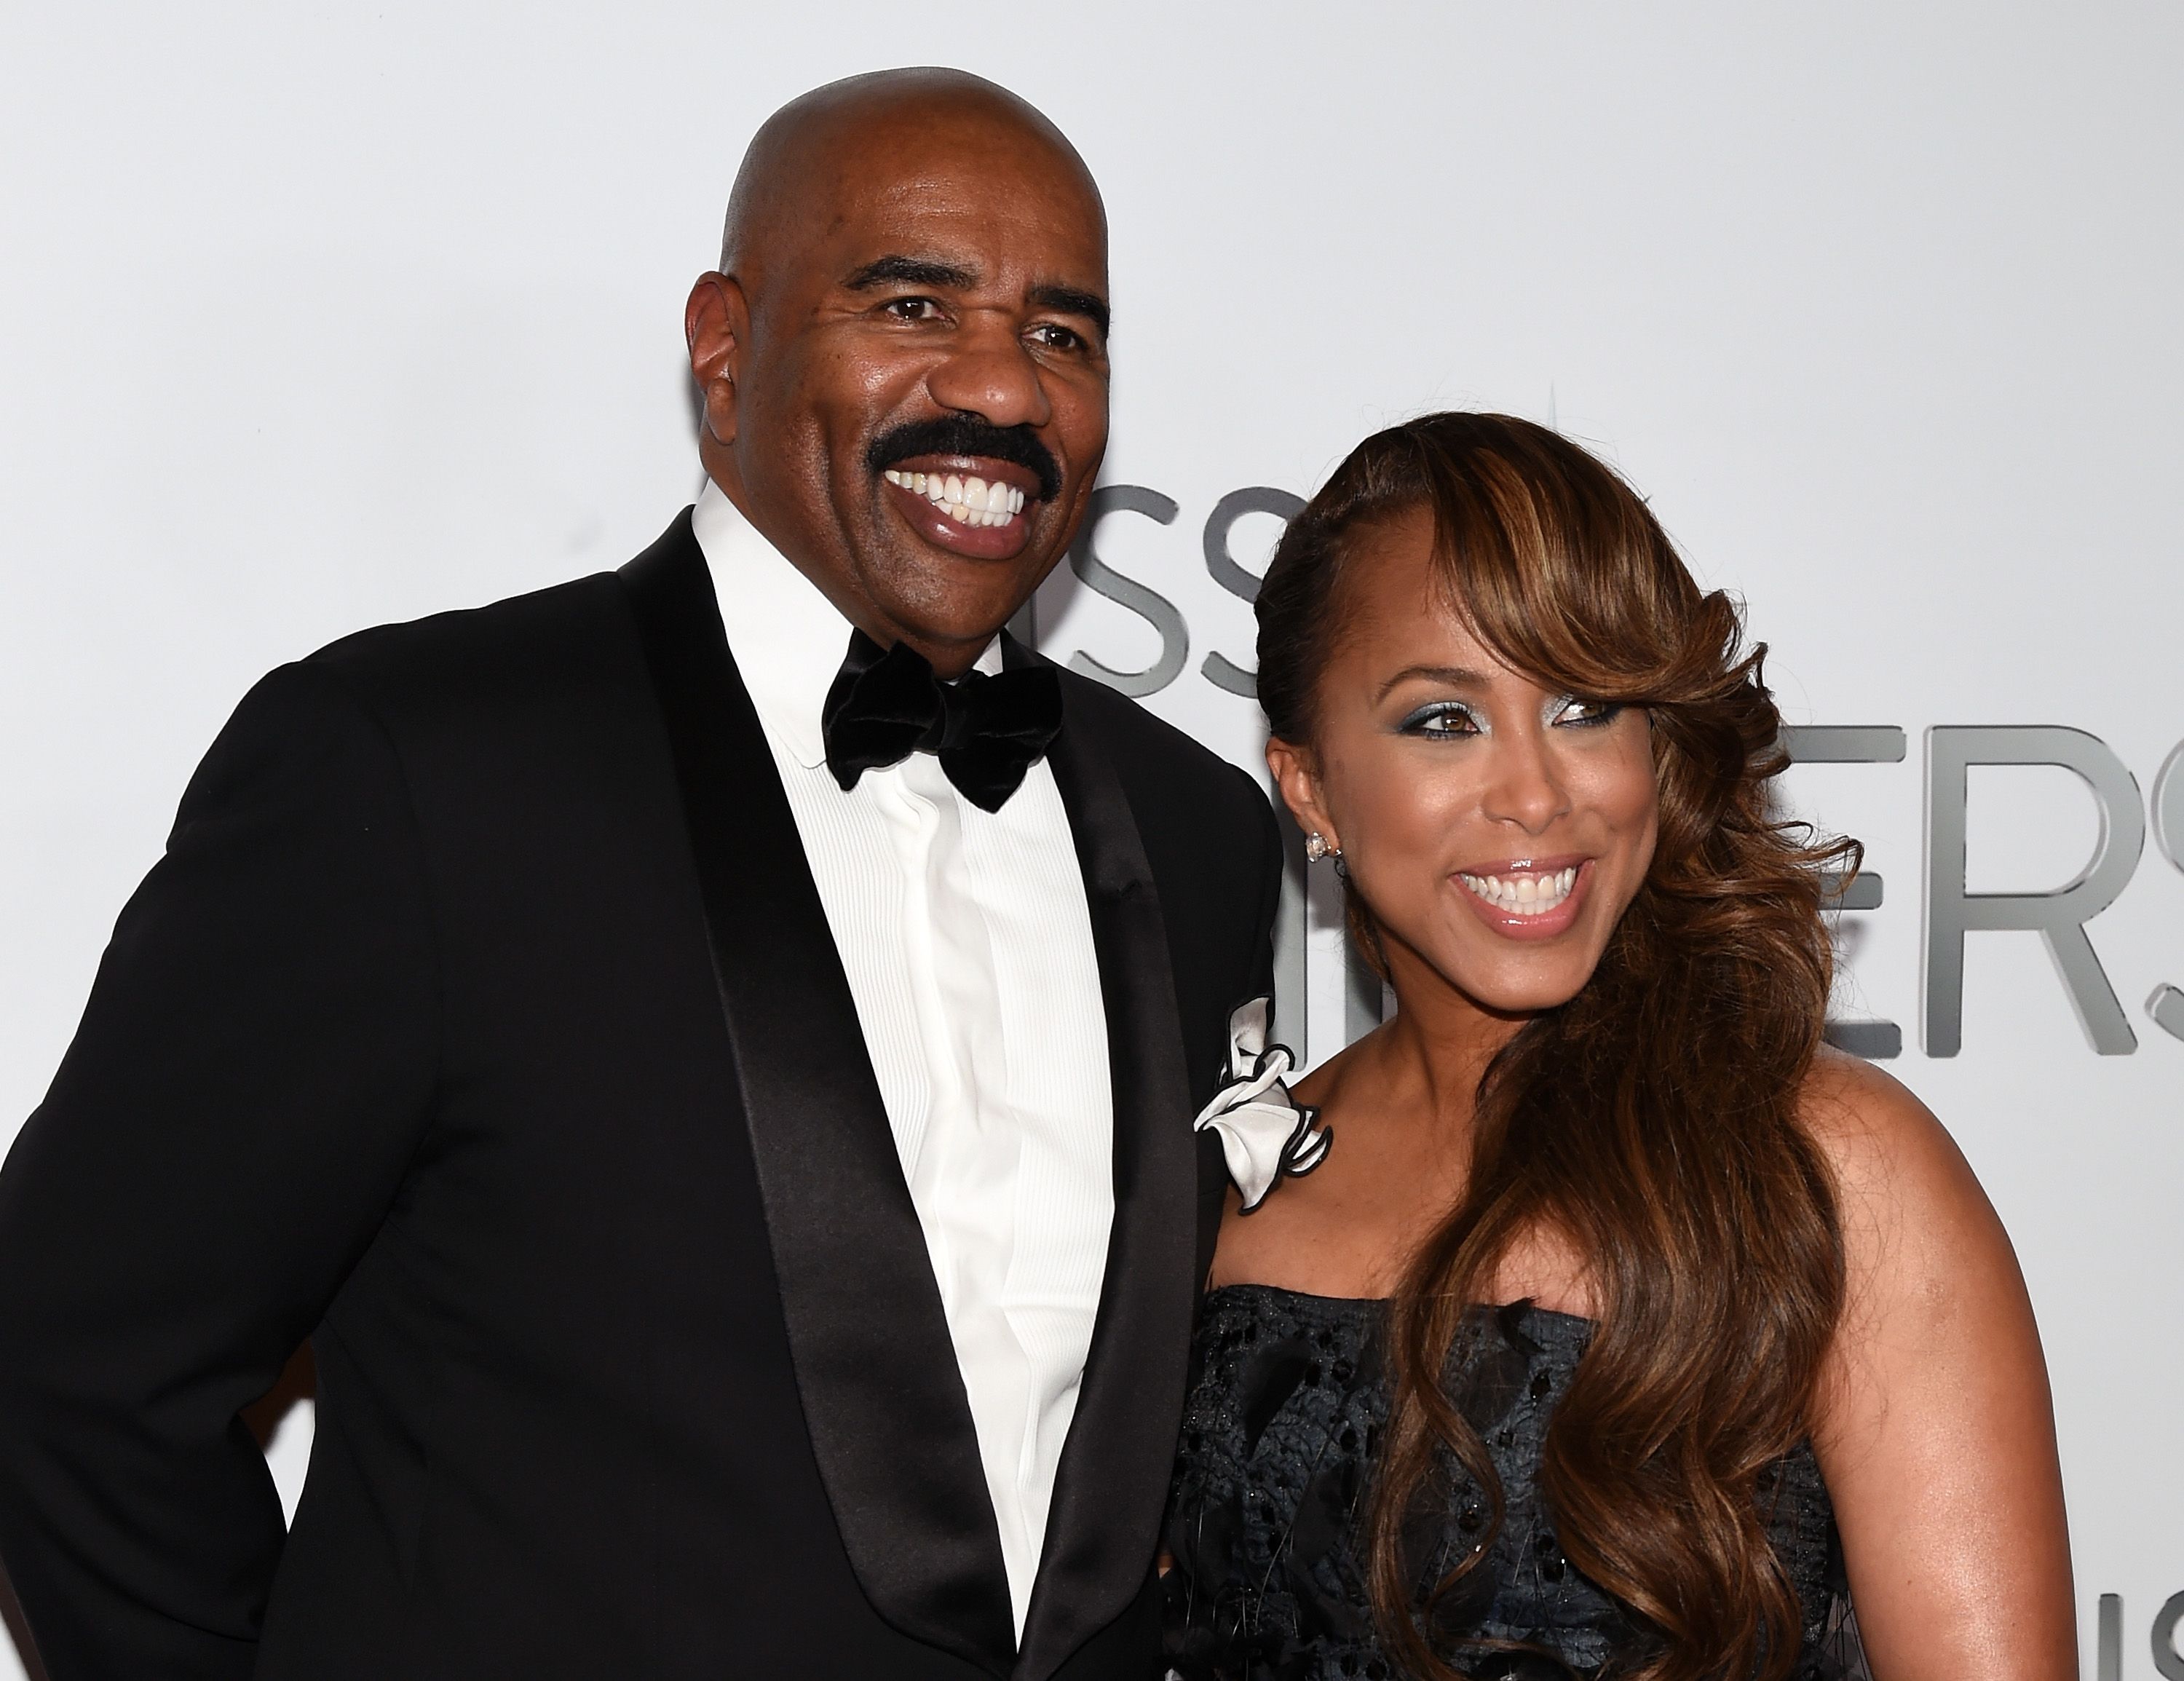 Steve Harvey and Marjorie Harvey during the 2015 Miss Universe Pageant at Planet Hollywood Resort & Casino on December 20, 2015 in Las Vegas, Nevada. | Source: Getty Images